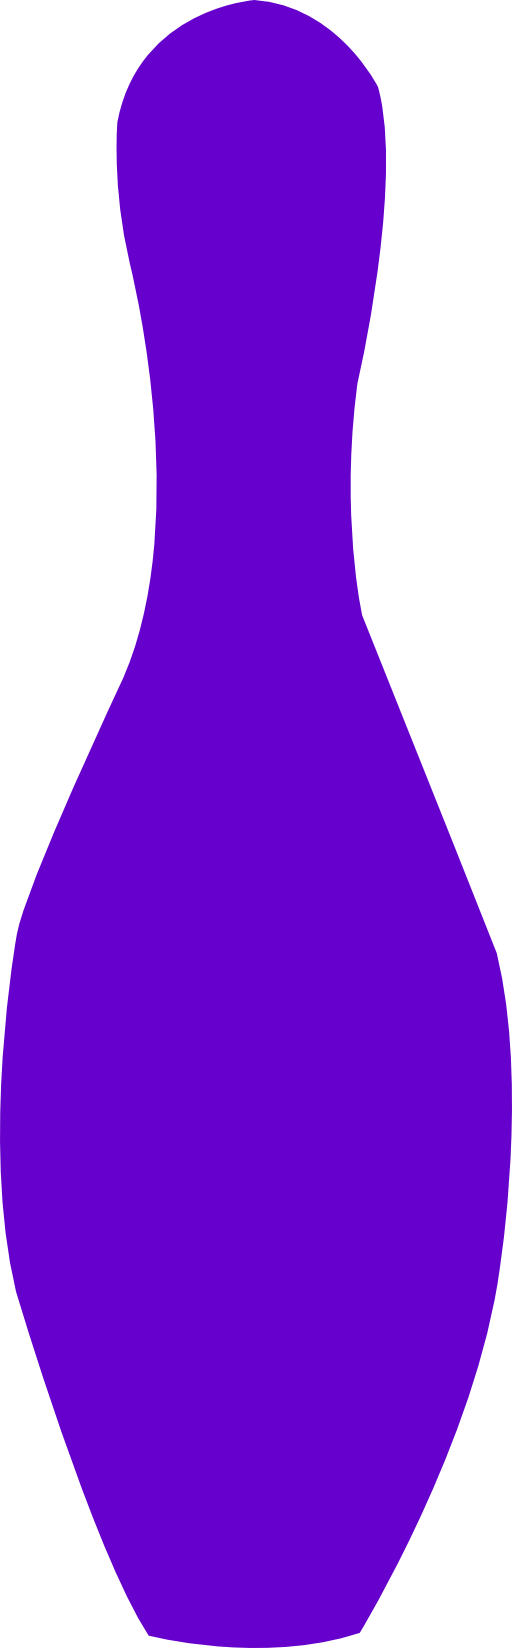 Bowling Pin Opurple Clipart Royalty Free Public ... - ClipArt Best ...